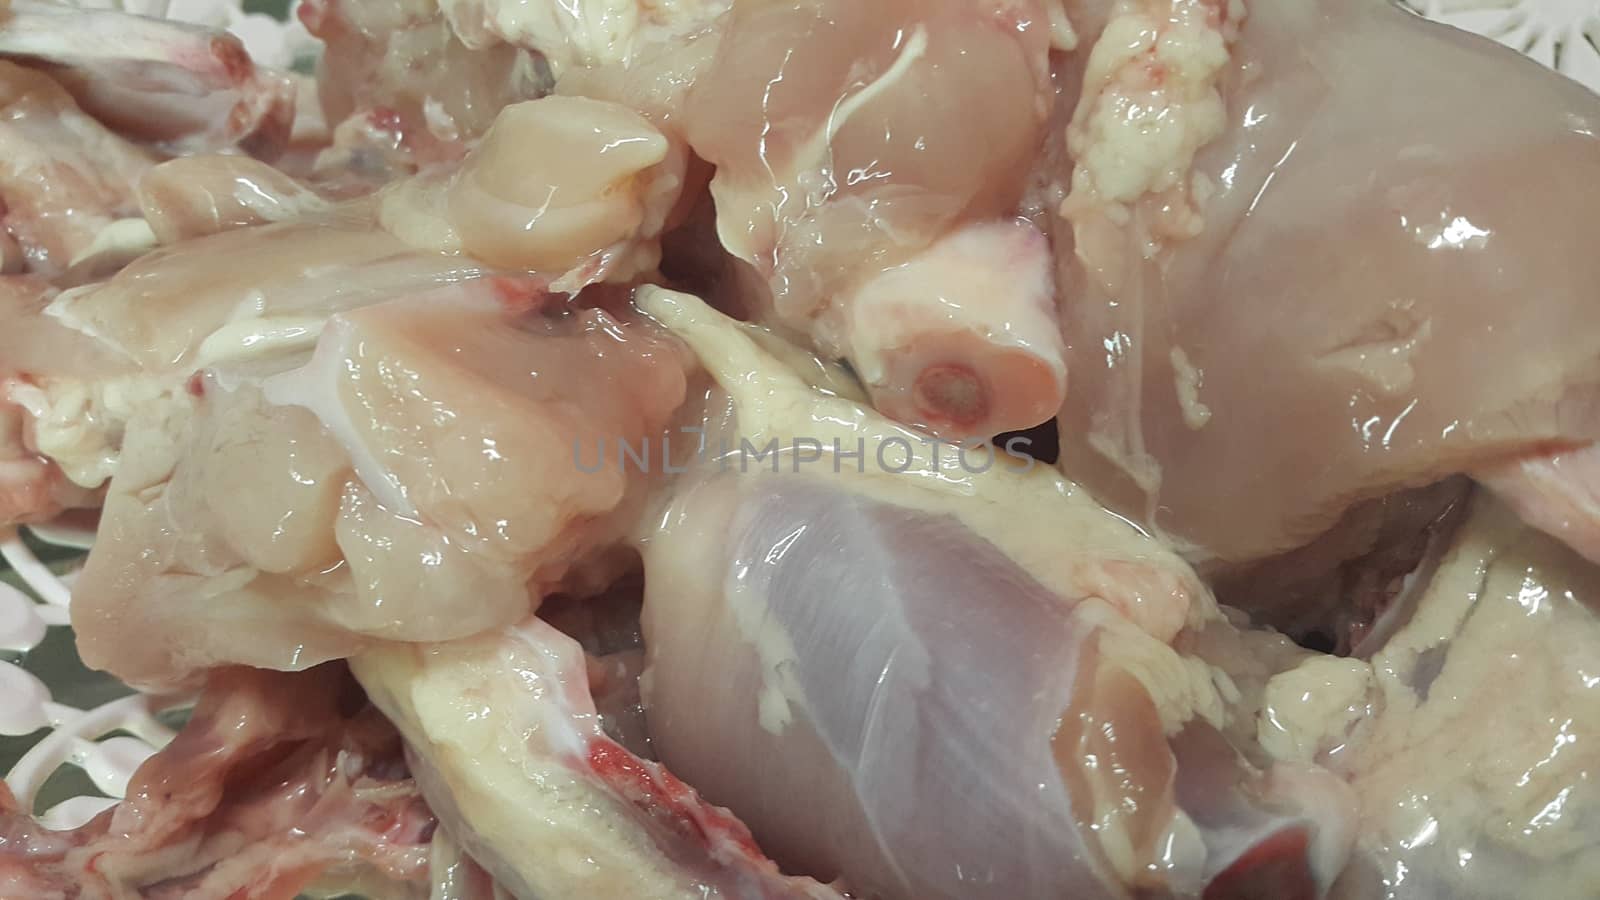 Chicken meat: Close up view of raw, fresh, choped and sliced chicken meat in grocery store use for food and ingredient background. 